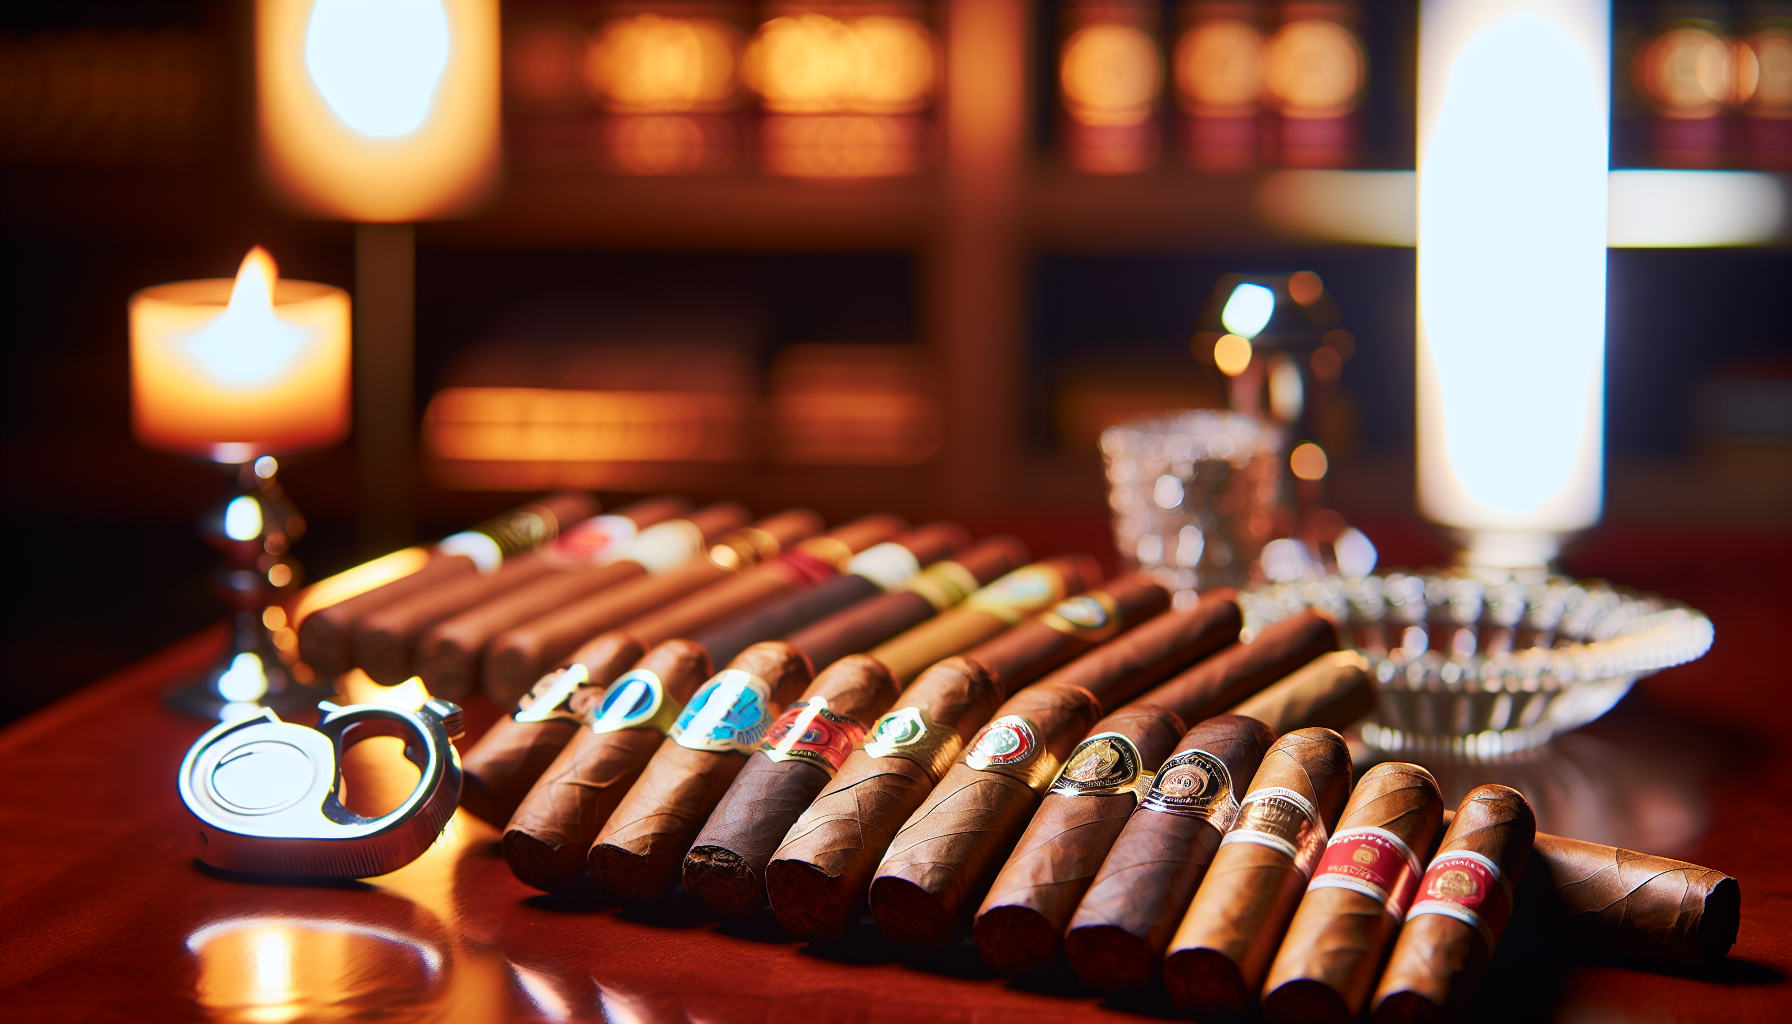 A variety of premium single cigars online, including Honduran, Dominican, and Nicaraguan options